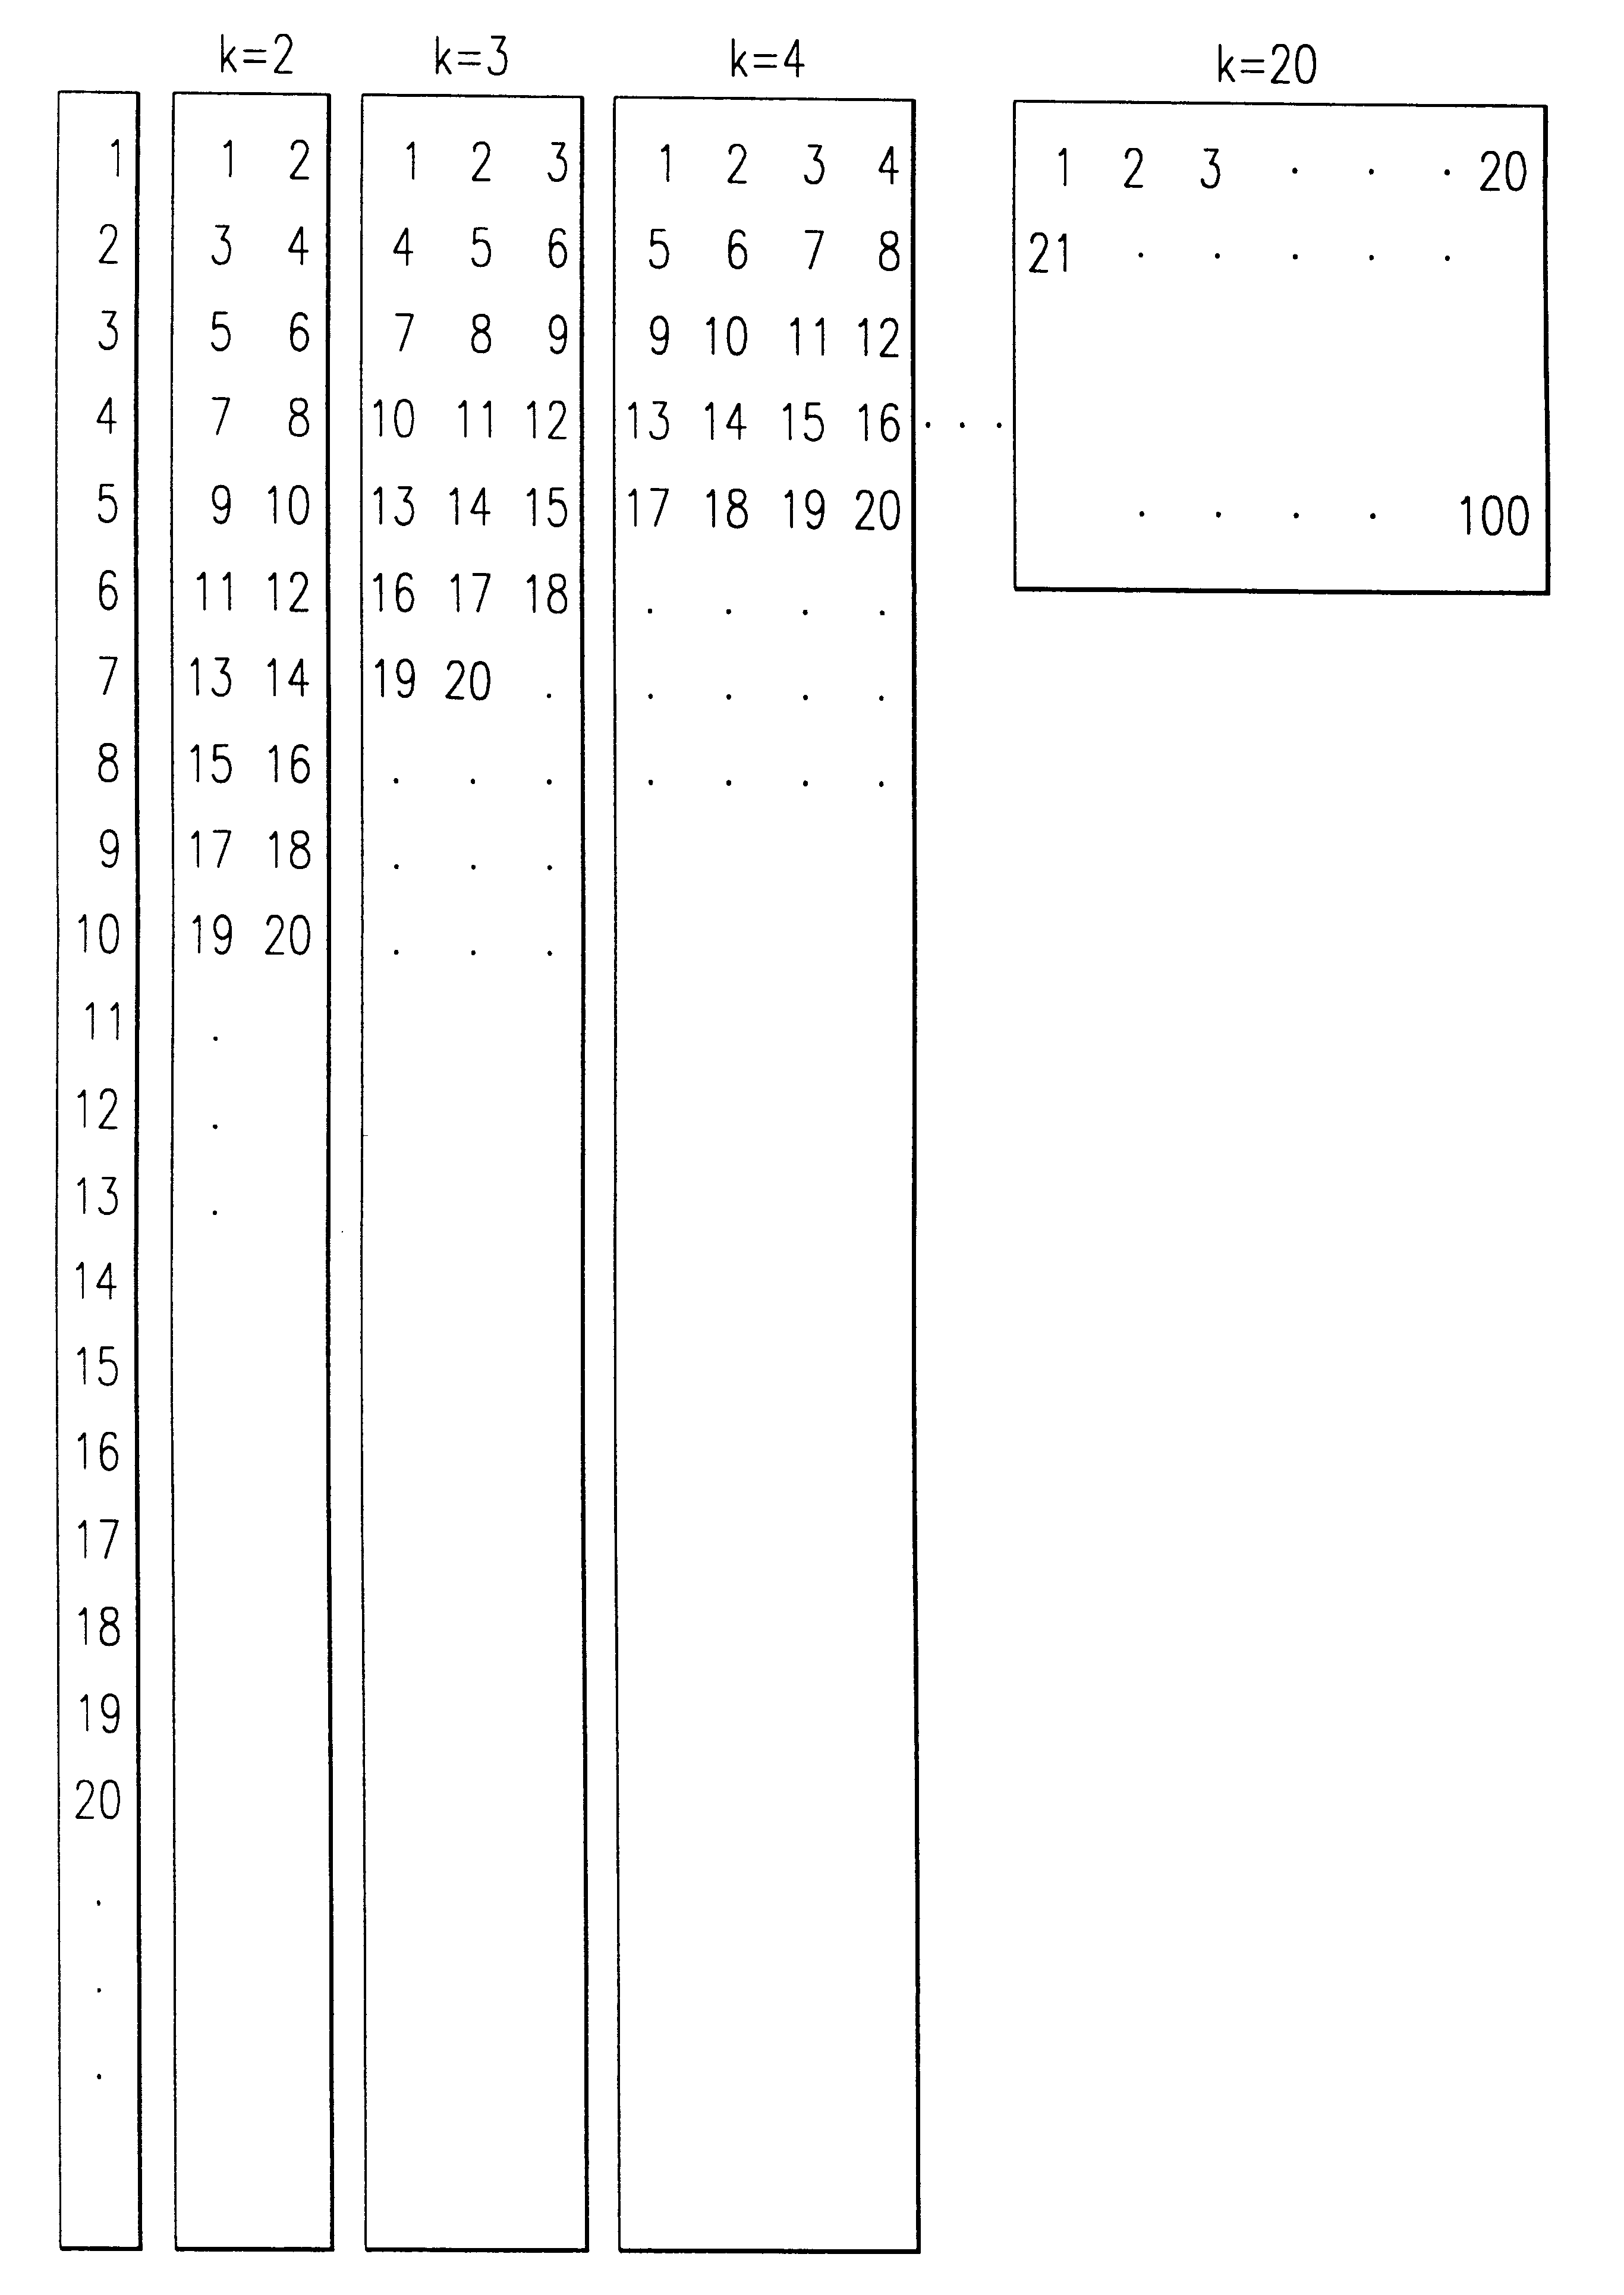 Method and apparatus for revealing latent characteristics existing in symbolic sequences